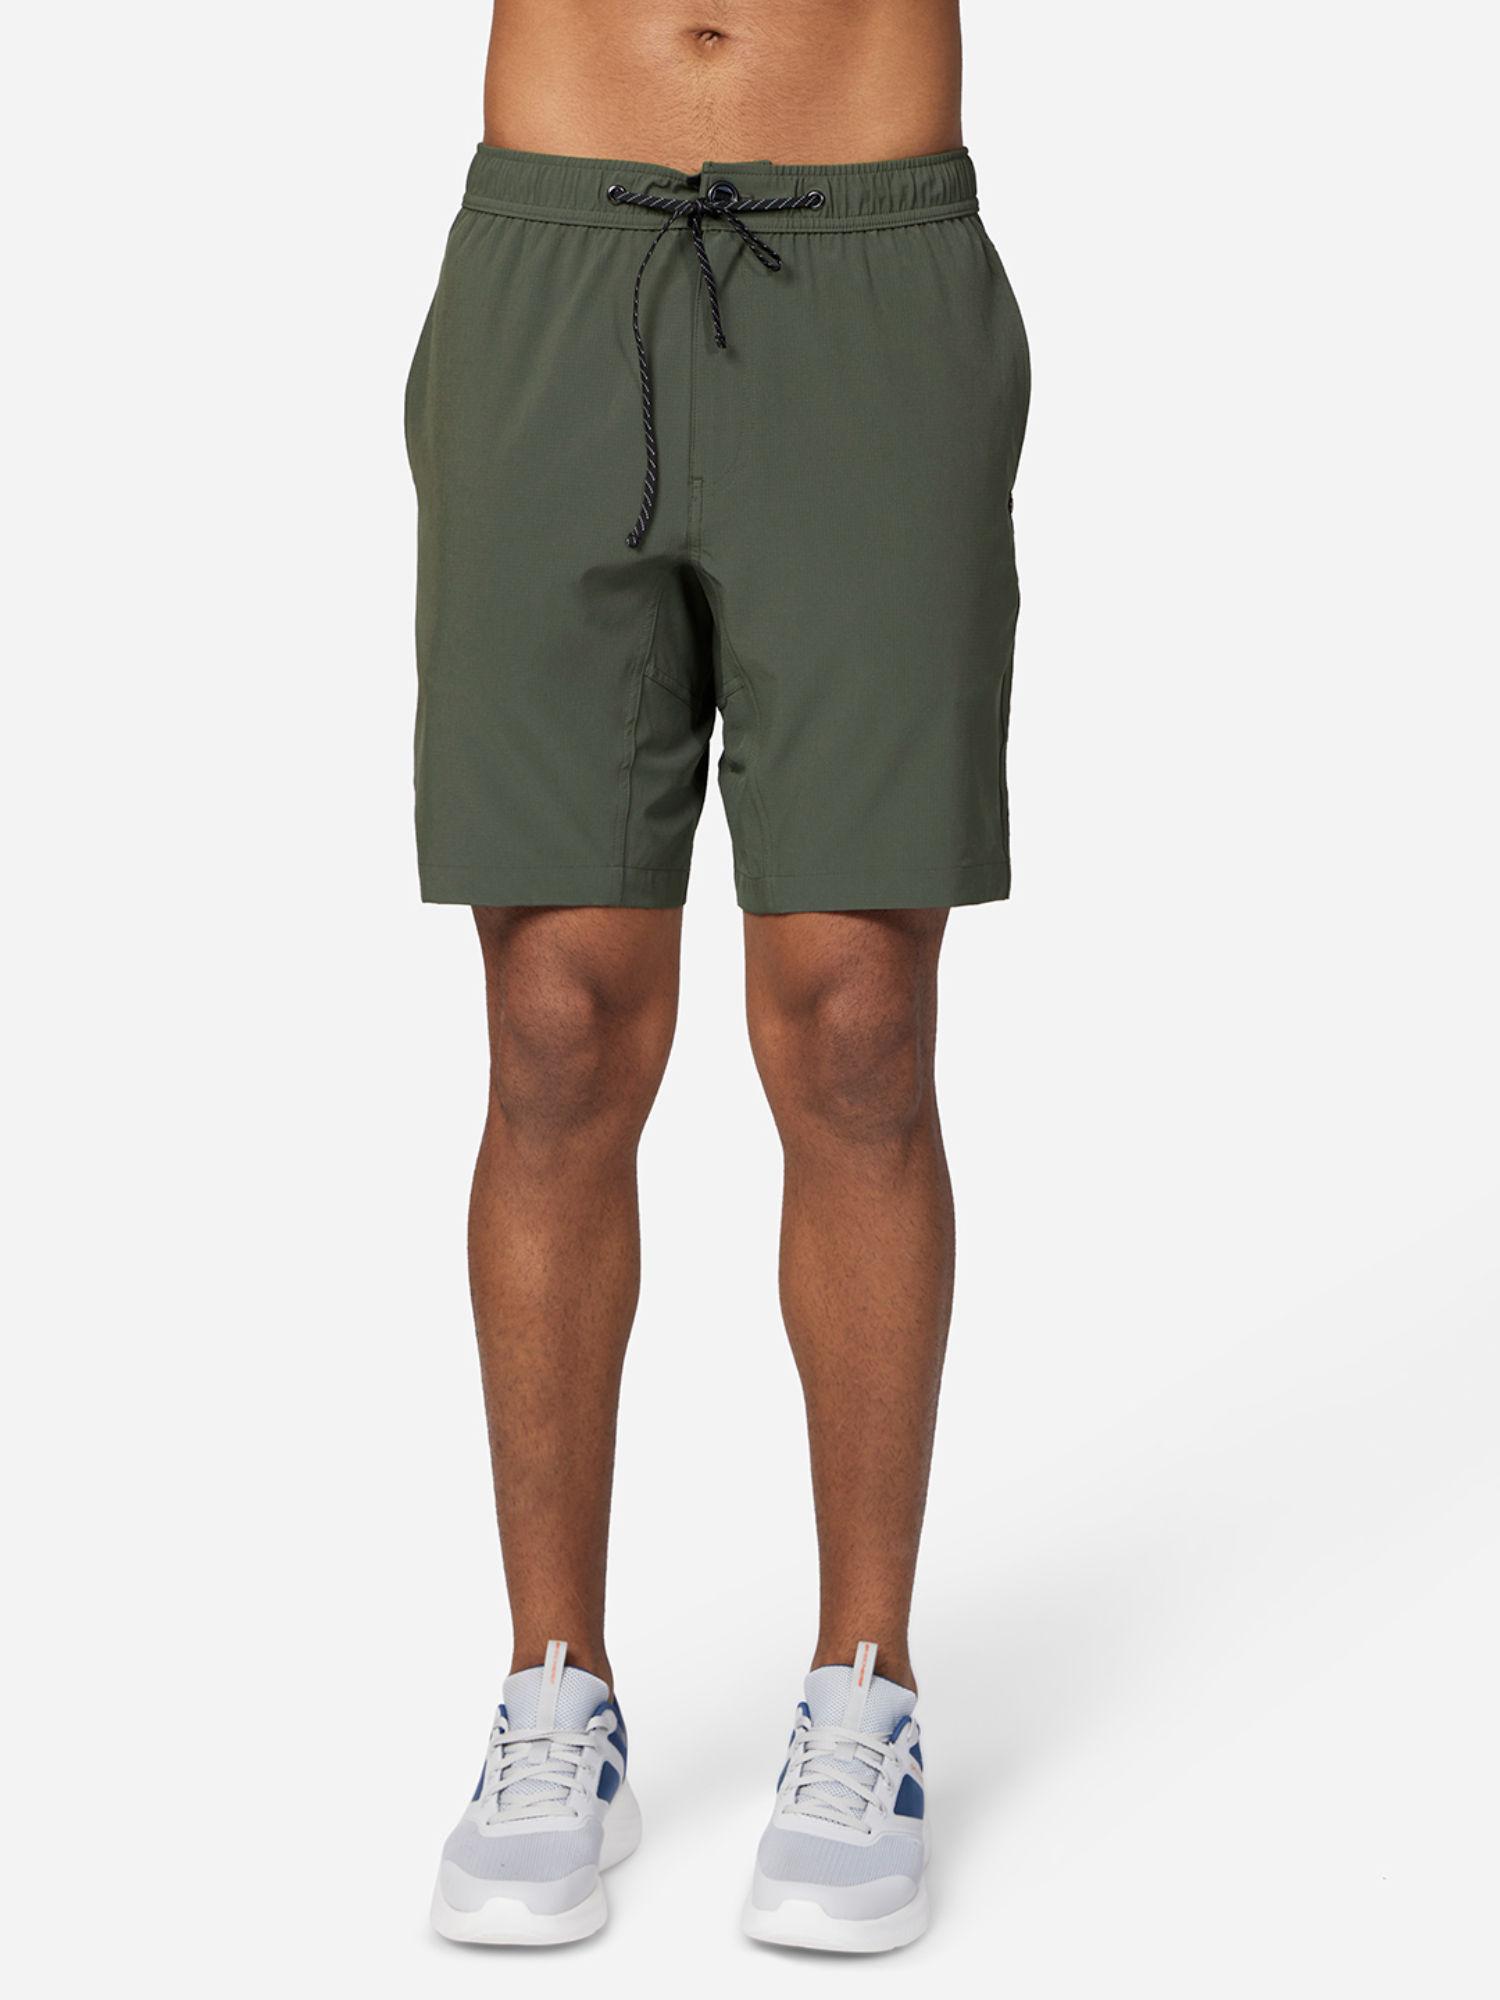 weave-tear-stop-9-shorts-olive-green